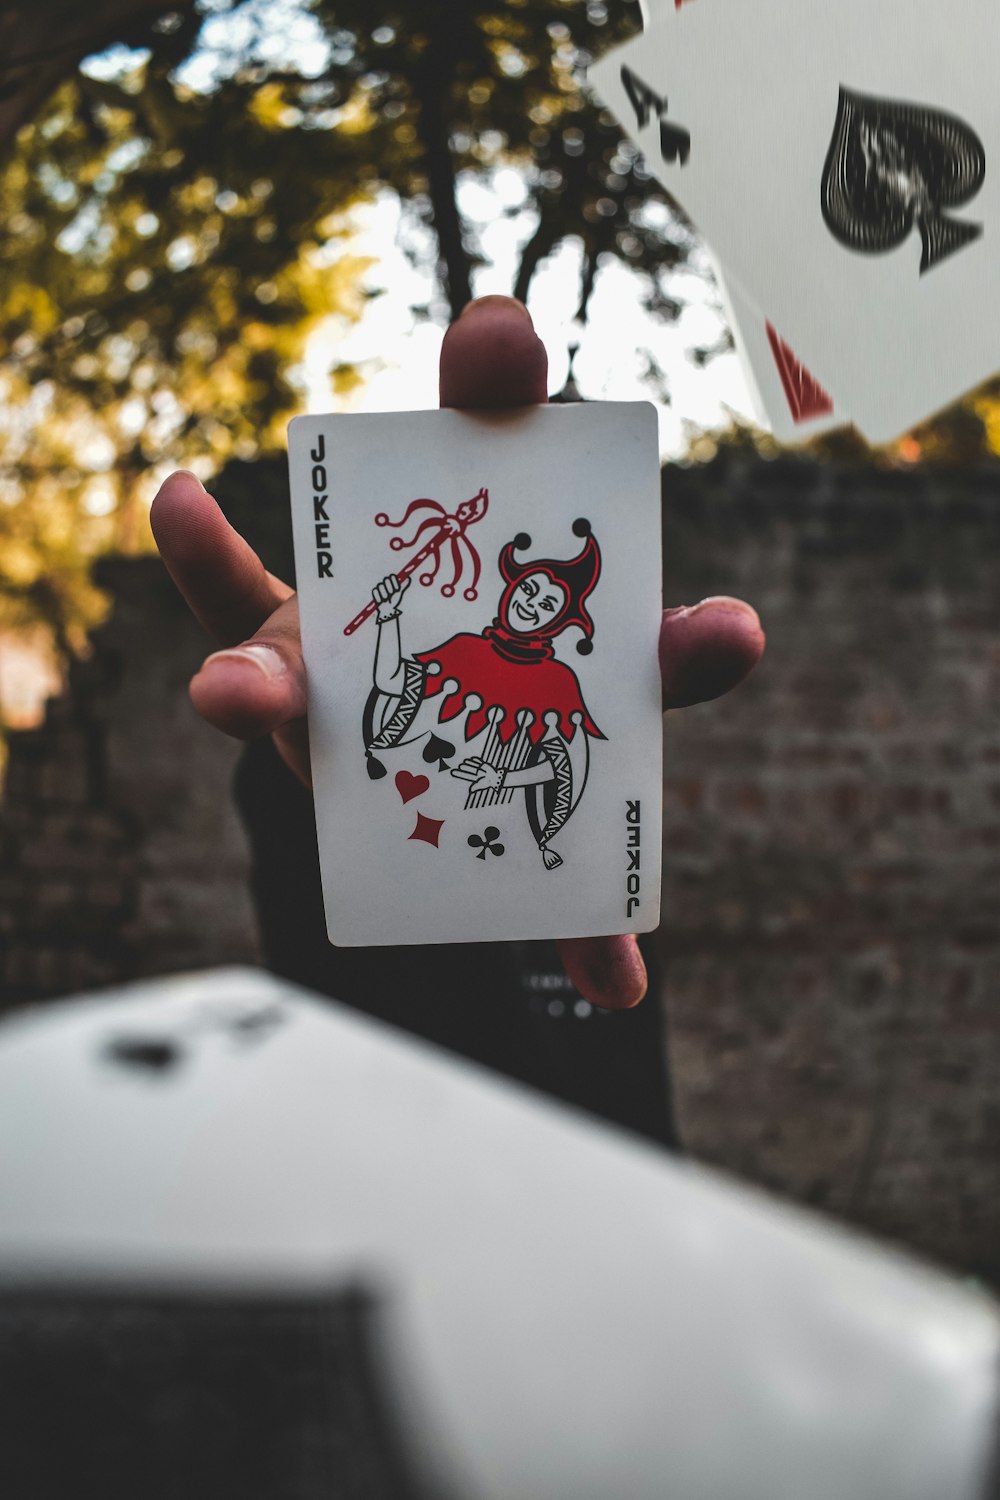 joker playing card on persons hand